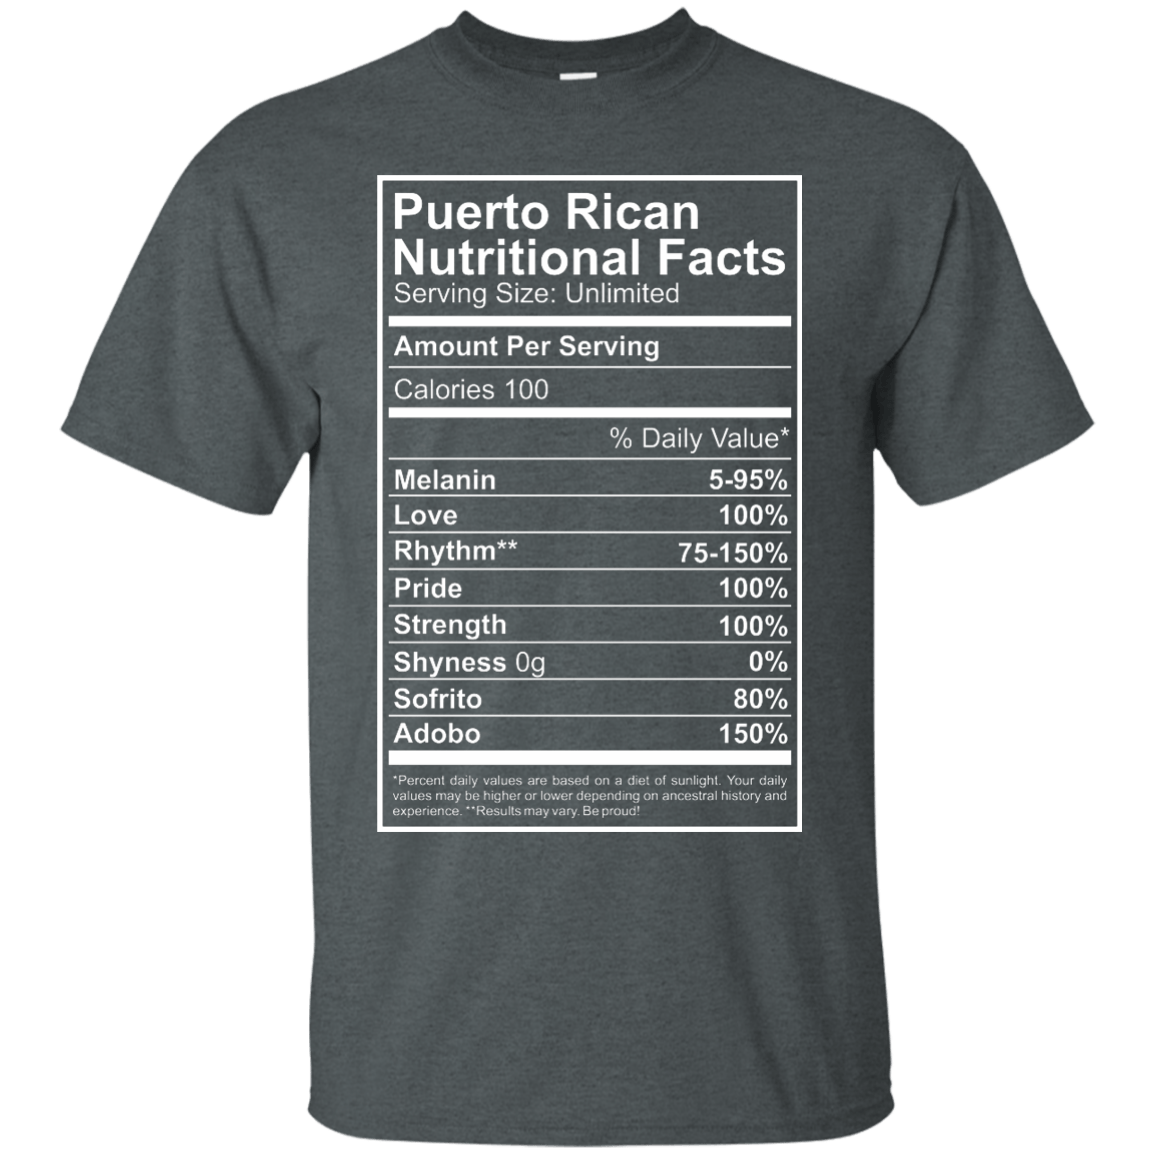 Shirt - Nutritional Facts